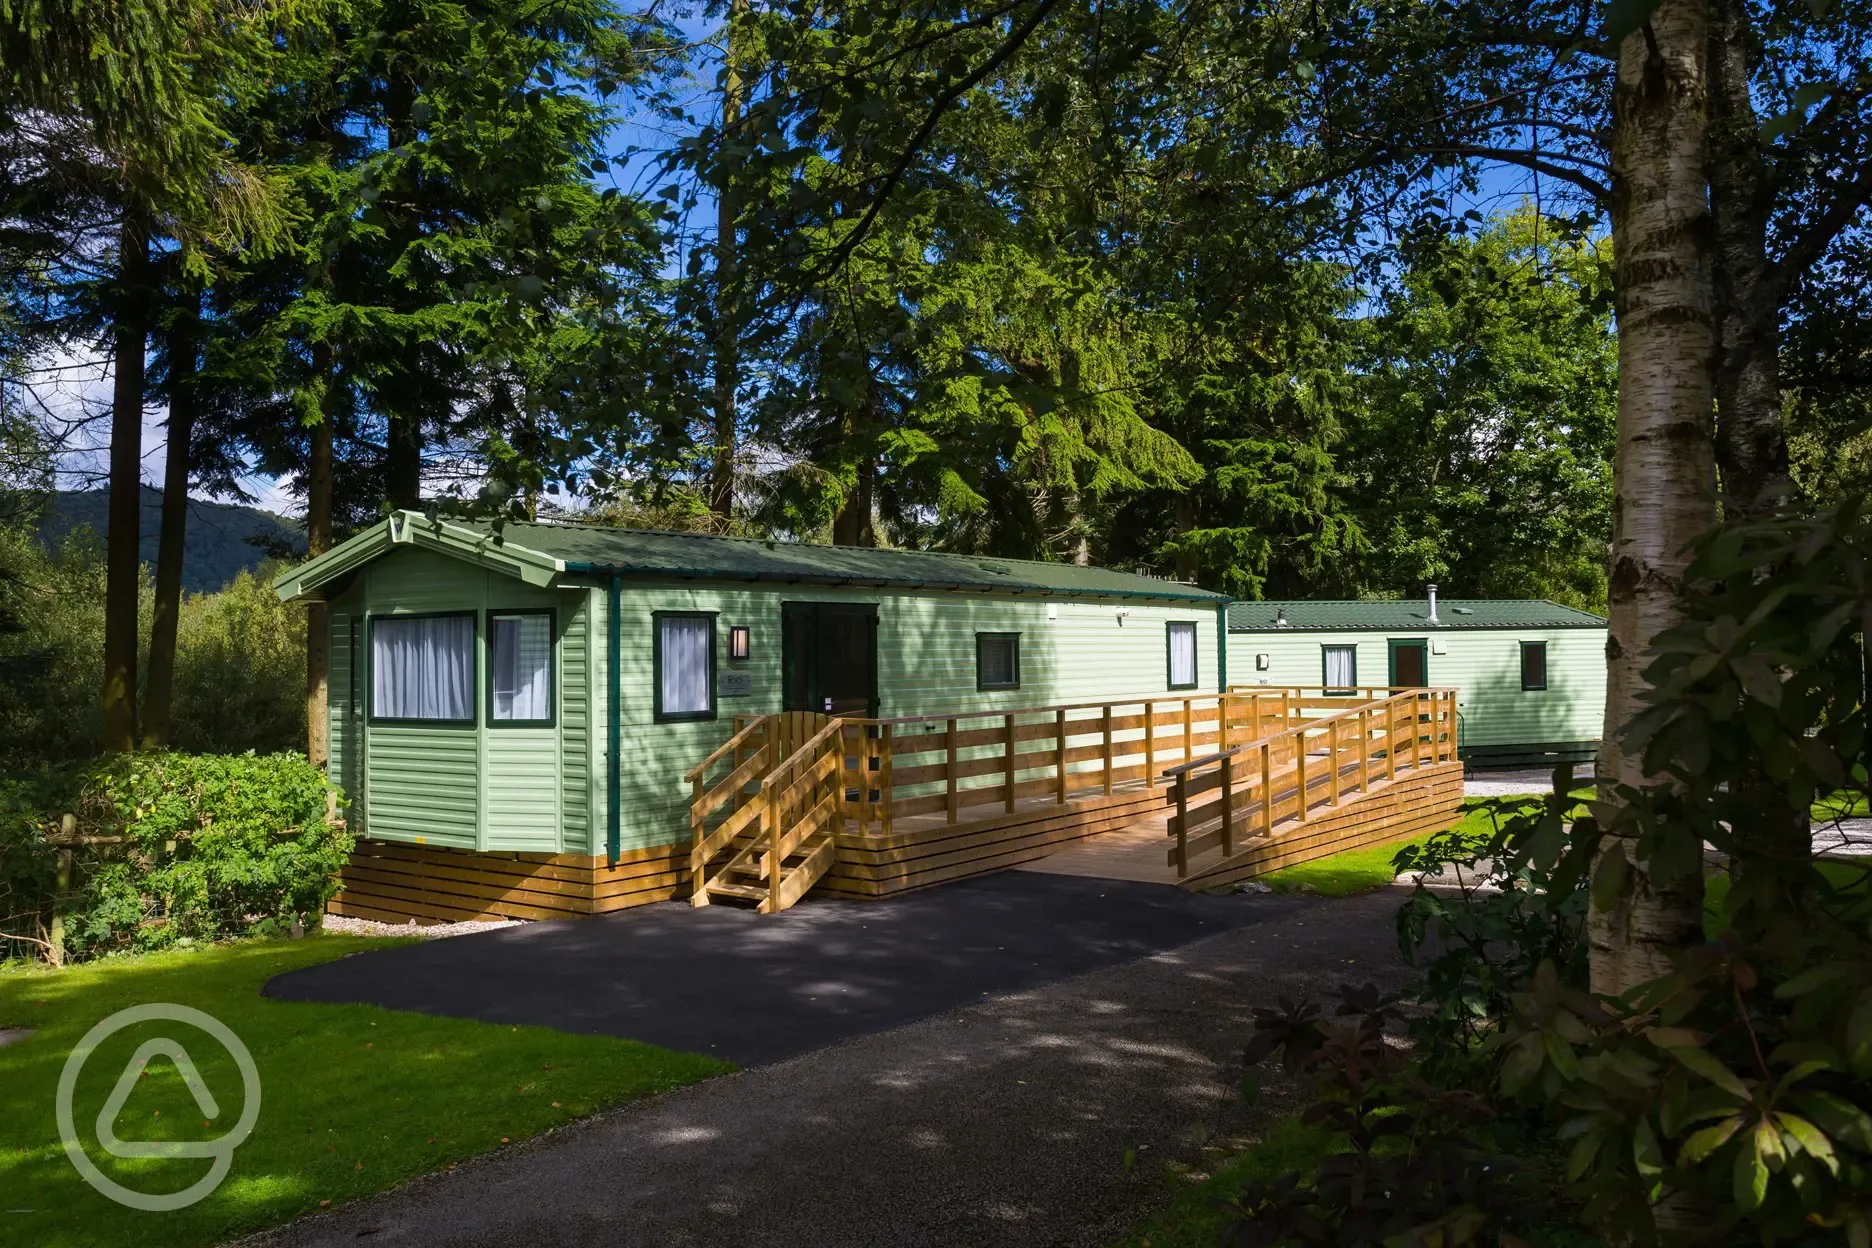 Exterior of the Derwent, our fully accessible caravan. Fully adapted with wheelchair access